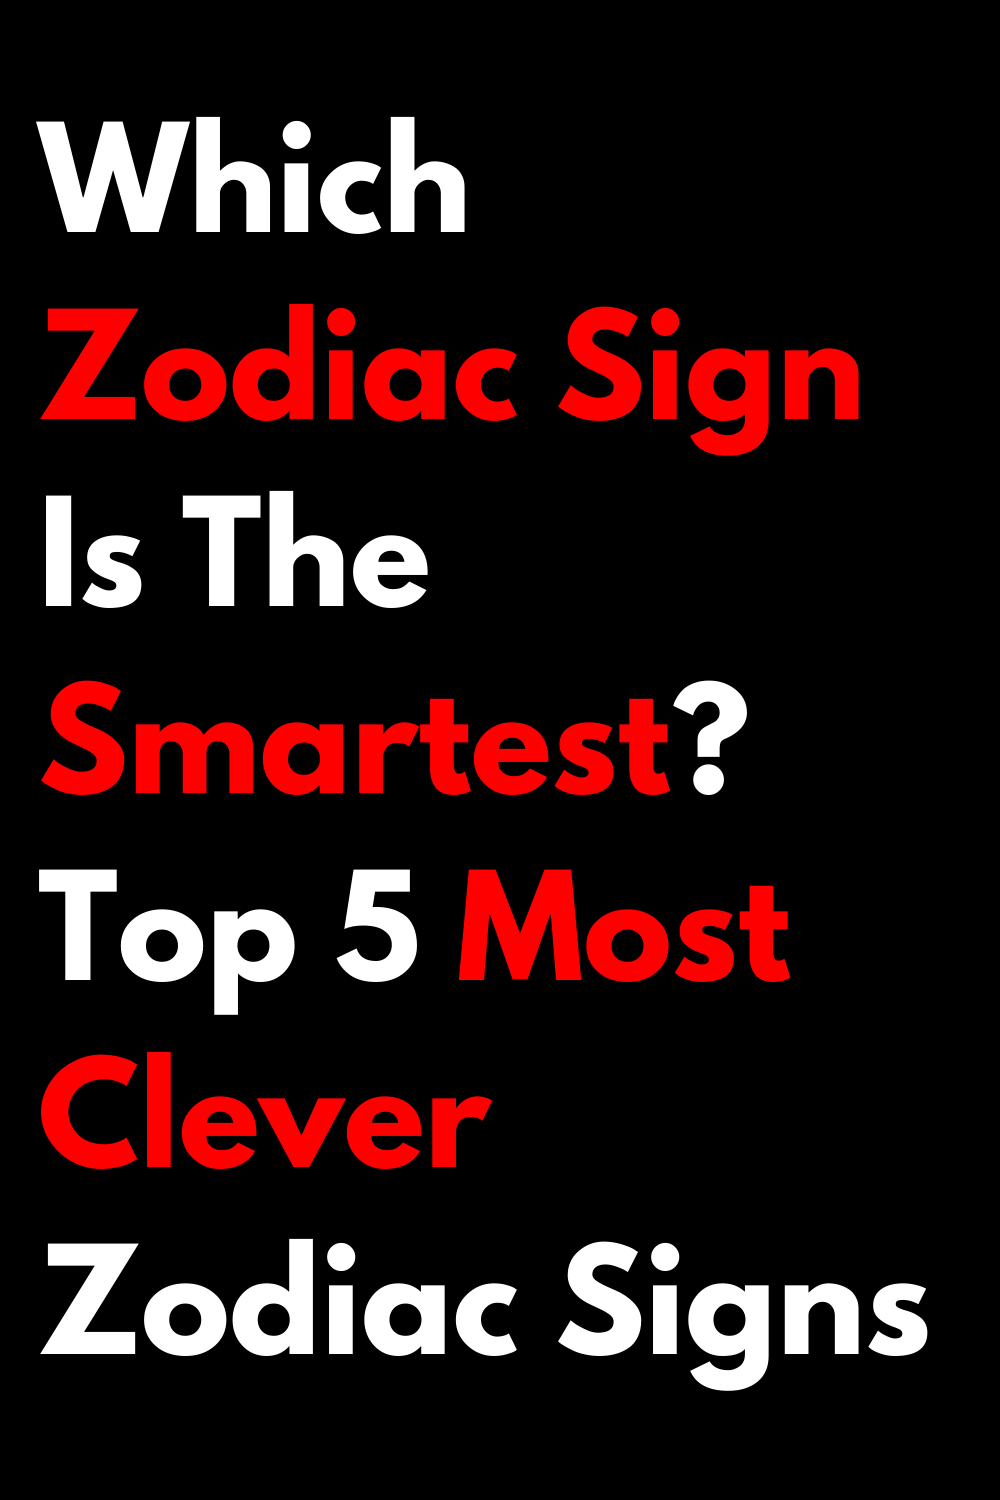 Which Zodiac Sign Is The Smartest? Top 5 Most Clever Zodiac Signs